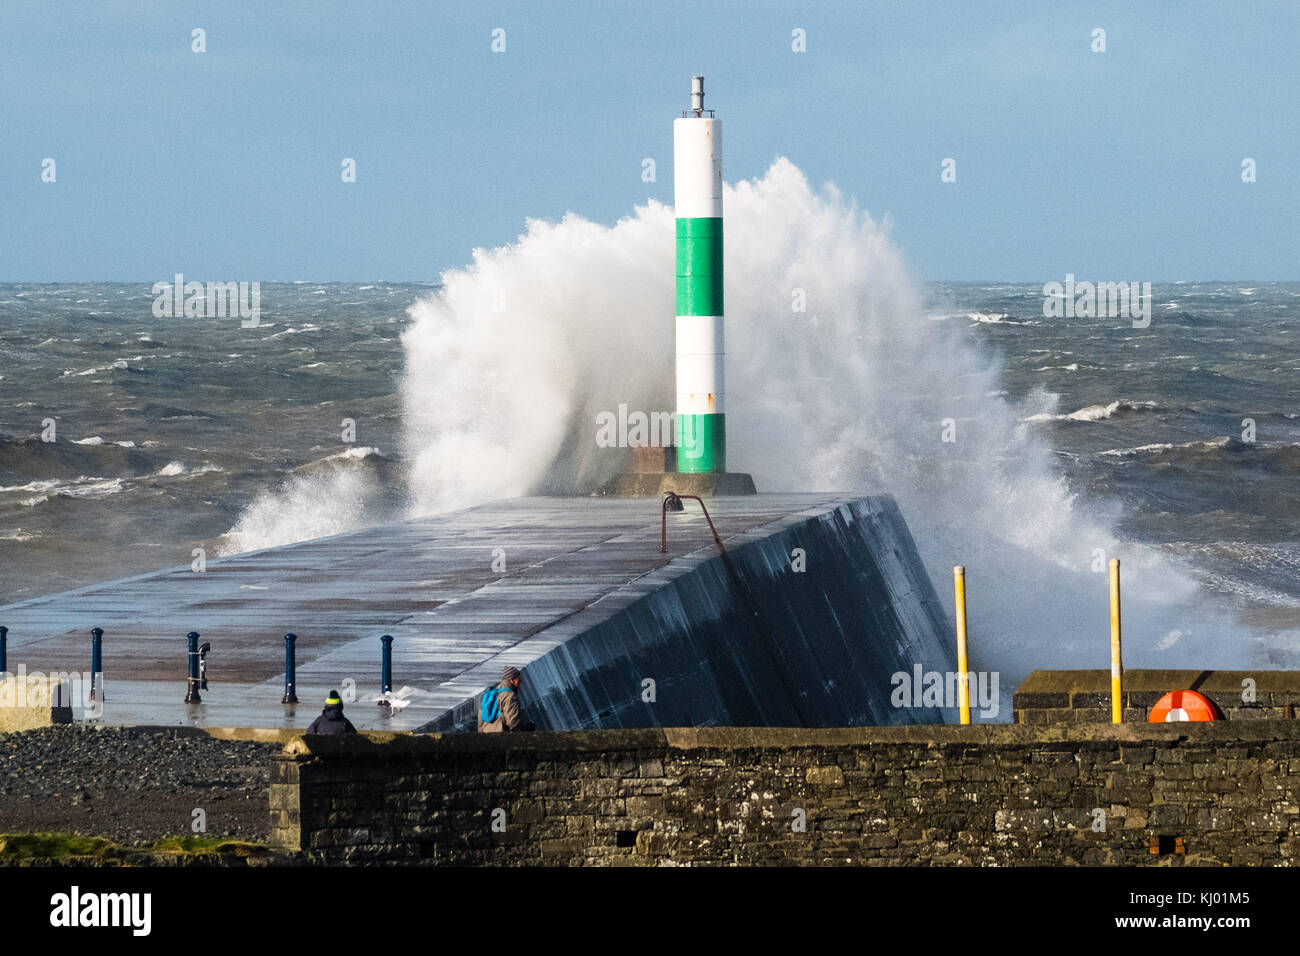 Aberystwyth Wales UK, Thursday 23 November 2017 UK Weather: High tides and very strong winds combine to bring waves crashing into the sea defences and promenade in Aberystwyth, on the Cardigan Bay coast of west wales. photo Credit: Keith Morris/Alamy Live News Stock Photo